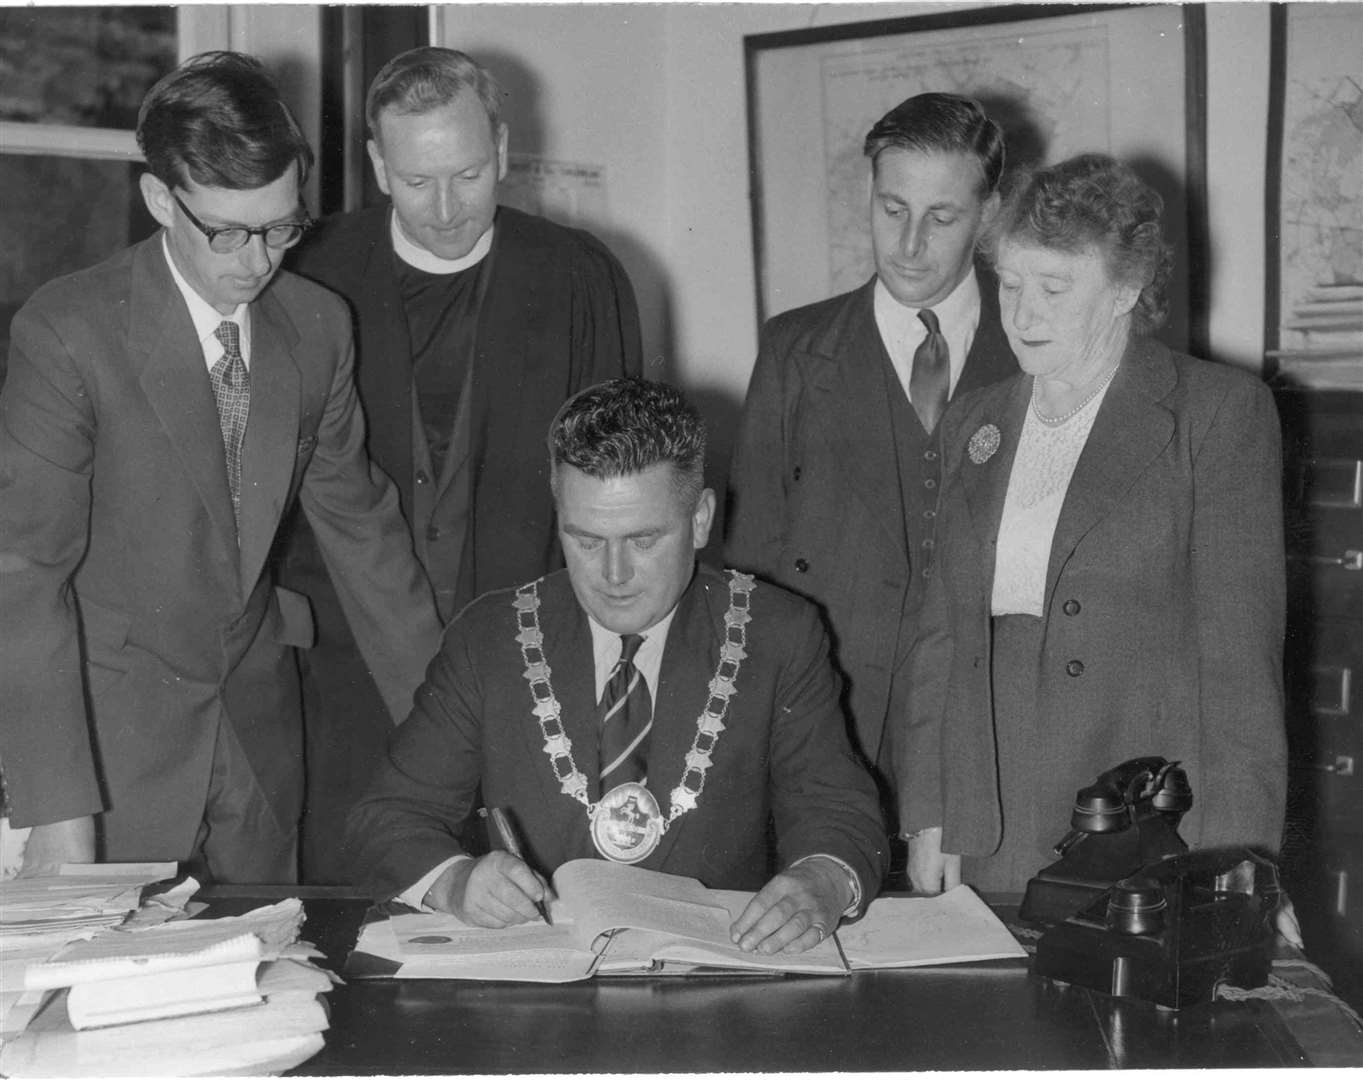 The historic signing of the London overspill agreement in 1959 was made by Ashford urban council chairman Cllr Charles Thomas. It saw many families relocate from the capital to the new housing estates springing up around the town - a trend that continues to this day